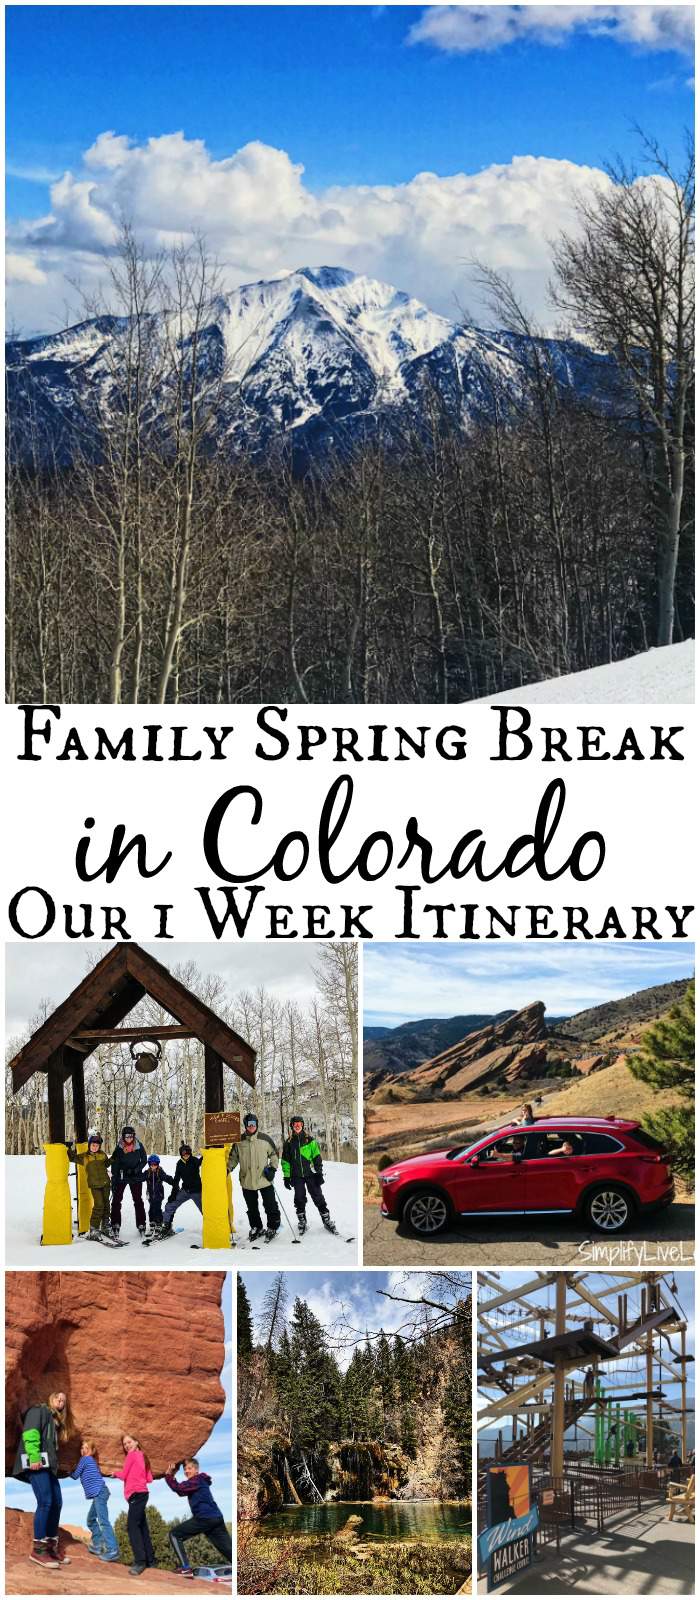 Colorado is one of the most popular spring break destinations in the US with beautiful weather and spring skiing. But there is more to do than just ski! If you're planning a Family Spring Break Colorado Extravaganza, our itinerary and tips can help!